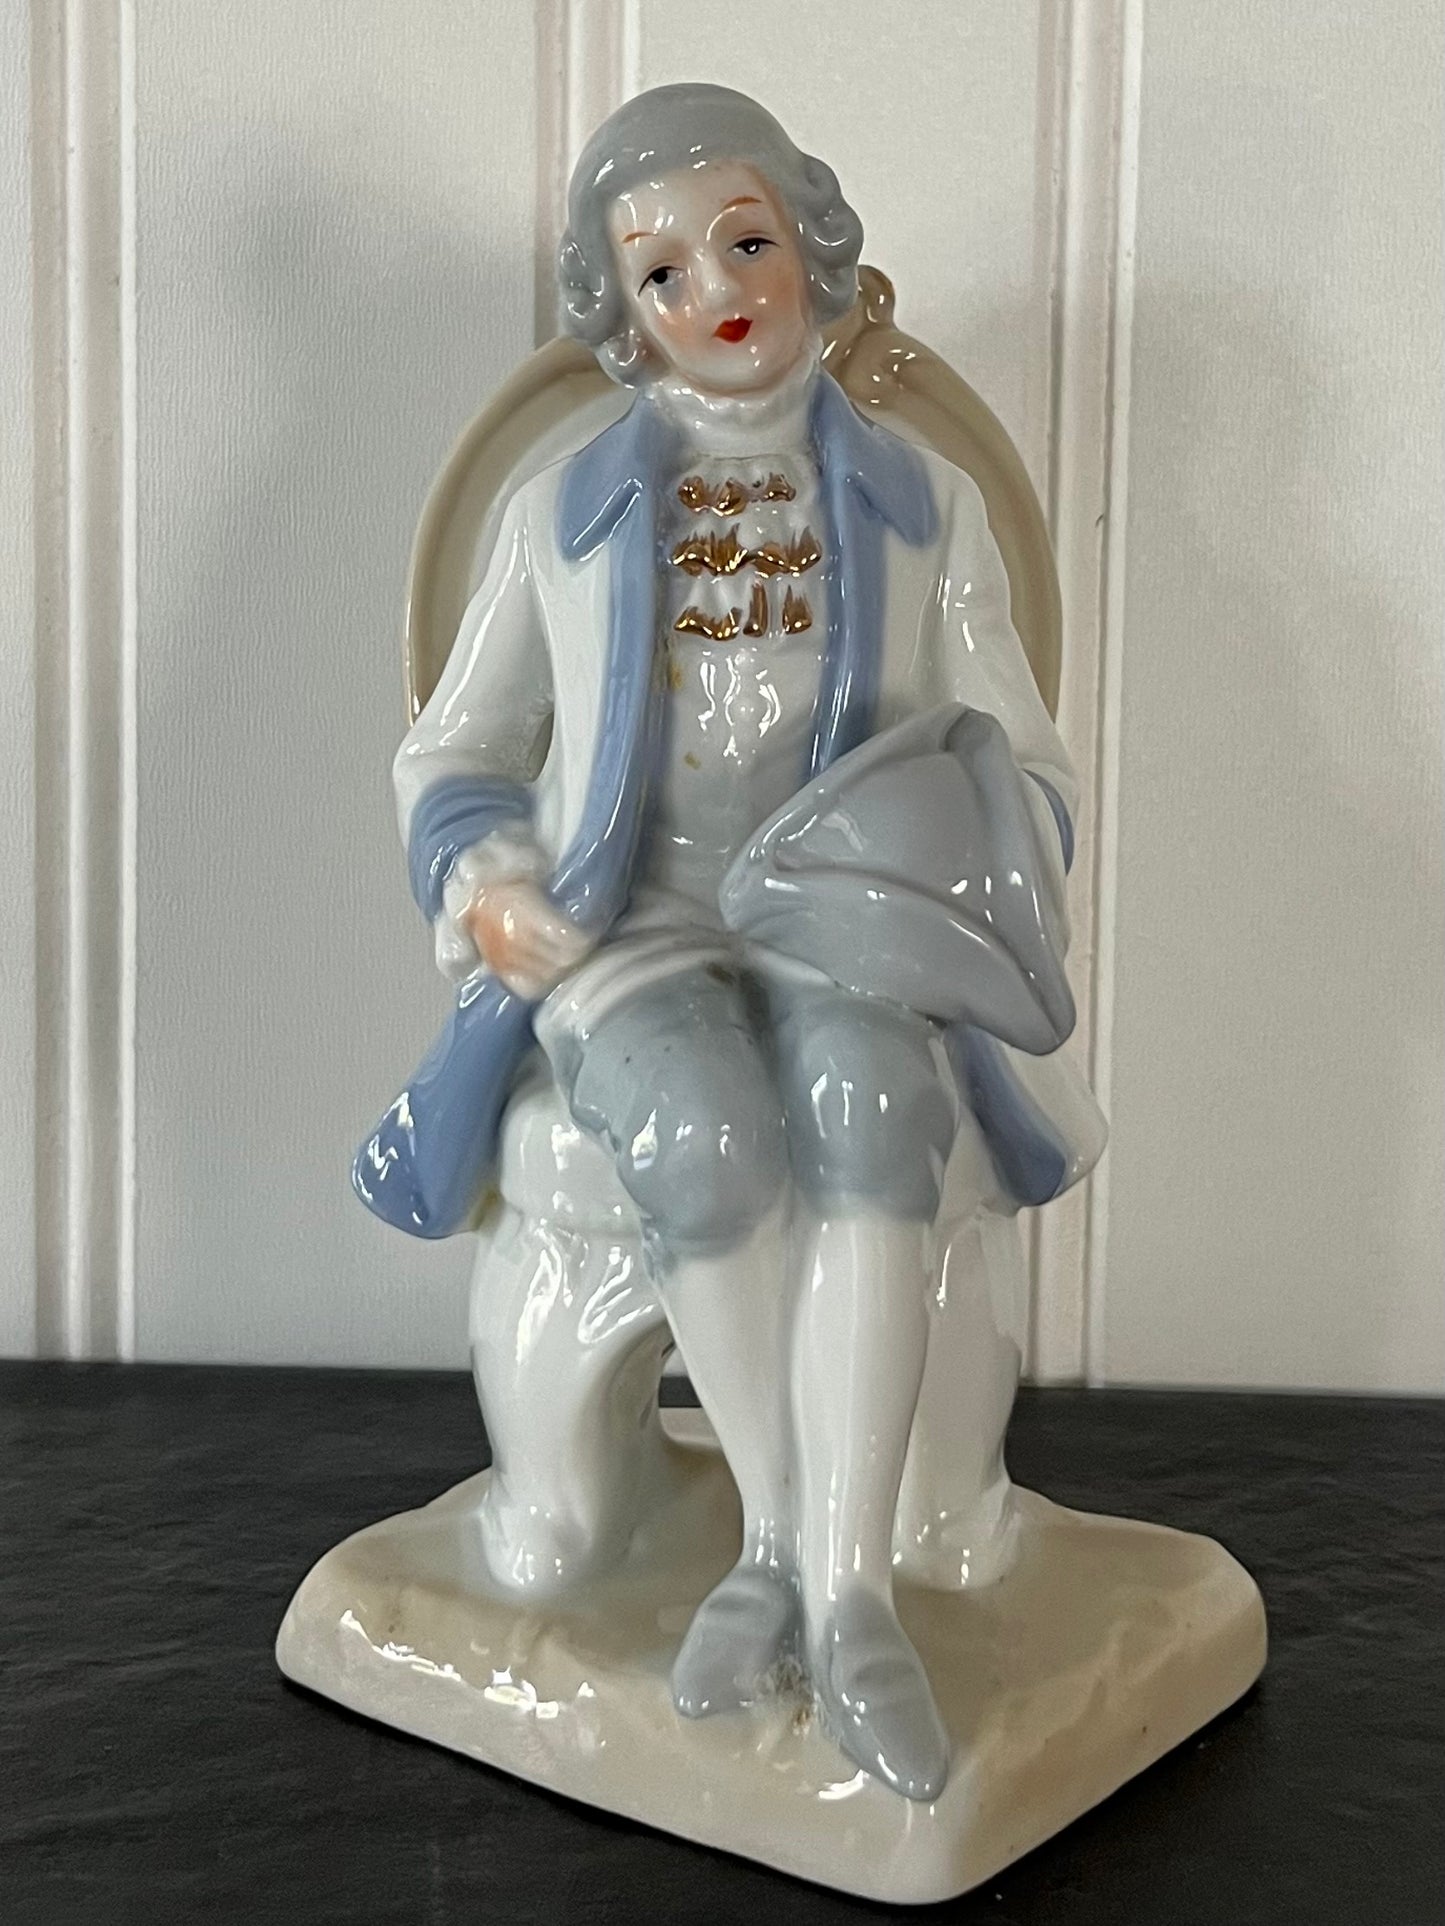 Vintage Blue and White French Provincial Colonial Regency Ceramic Porcelain Figurines - Gentleman and Lady Set